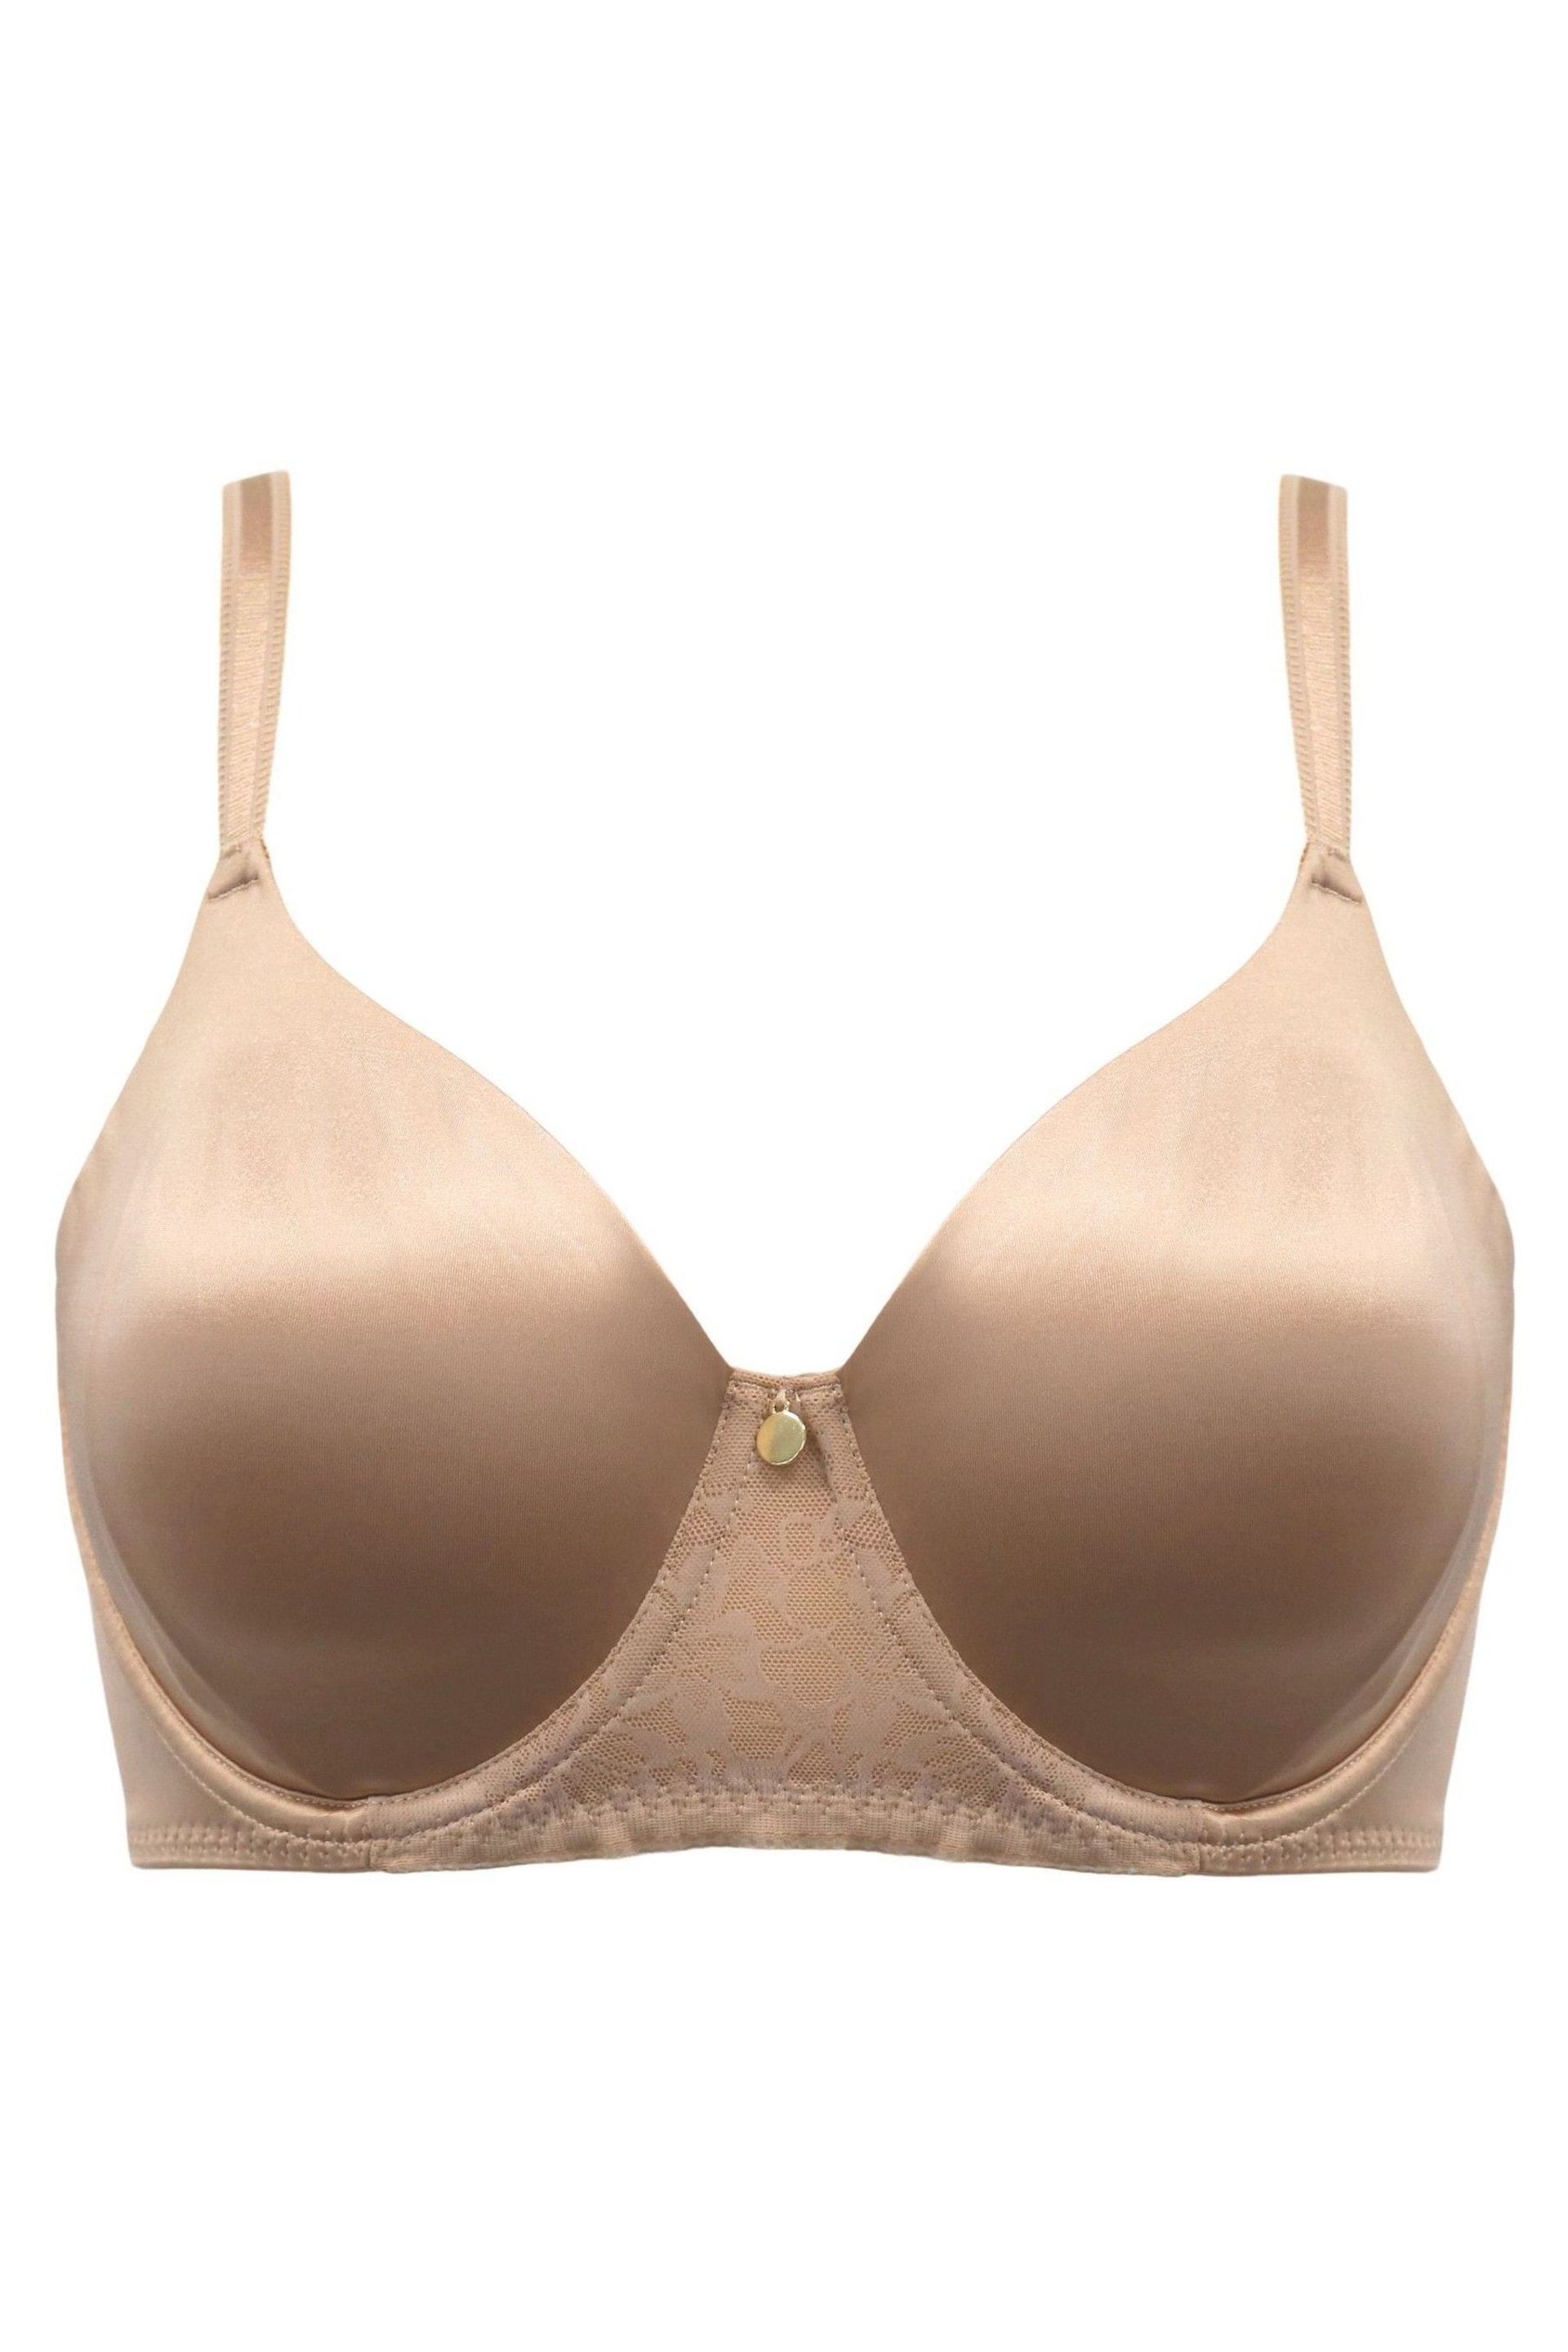 Pour Moi Nude Effortless Non Padded Underwired Double Layer Moulded Bra - Image 3 of 4